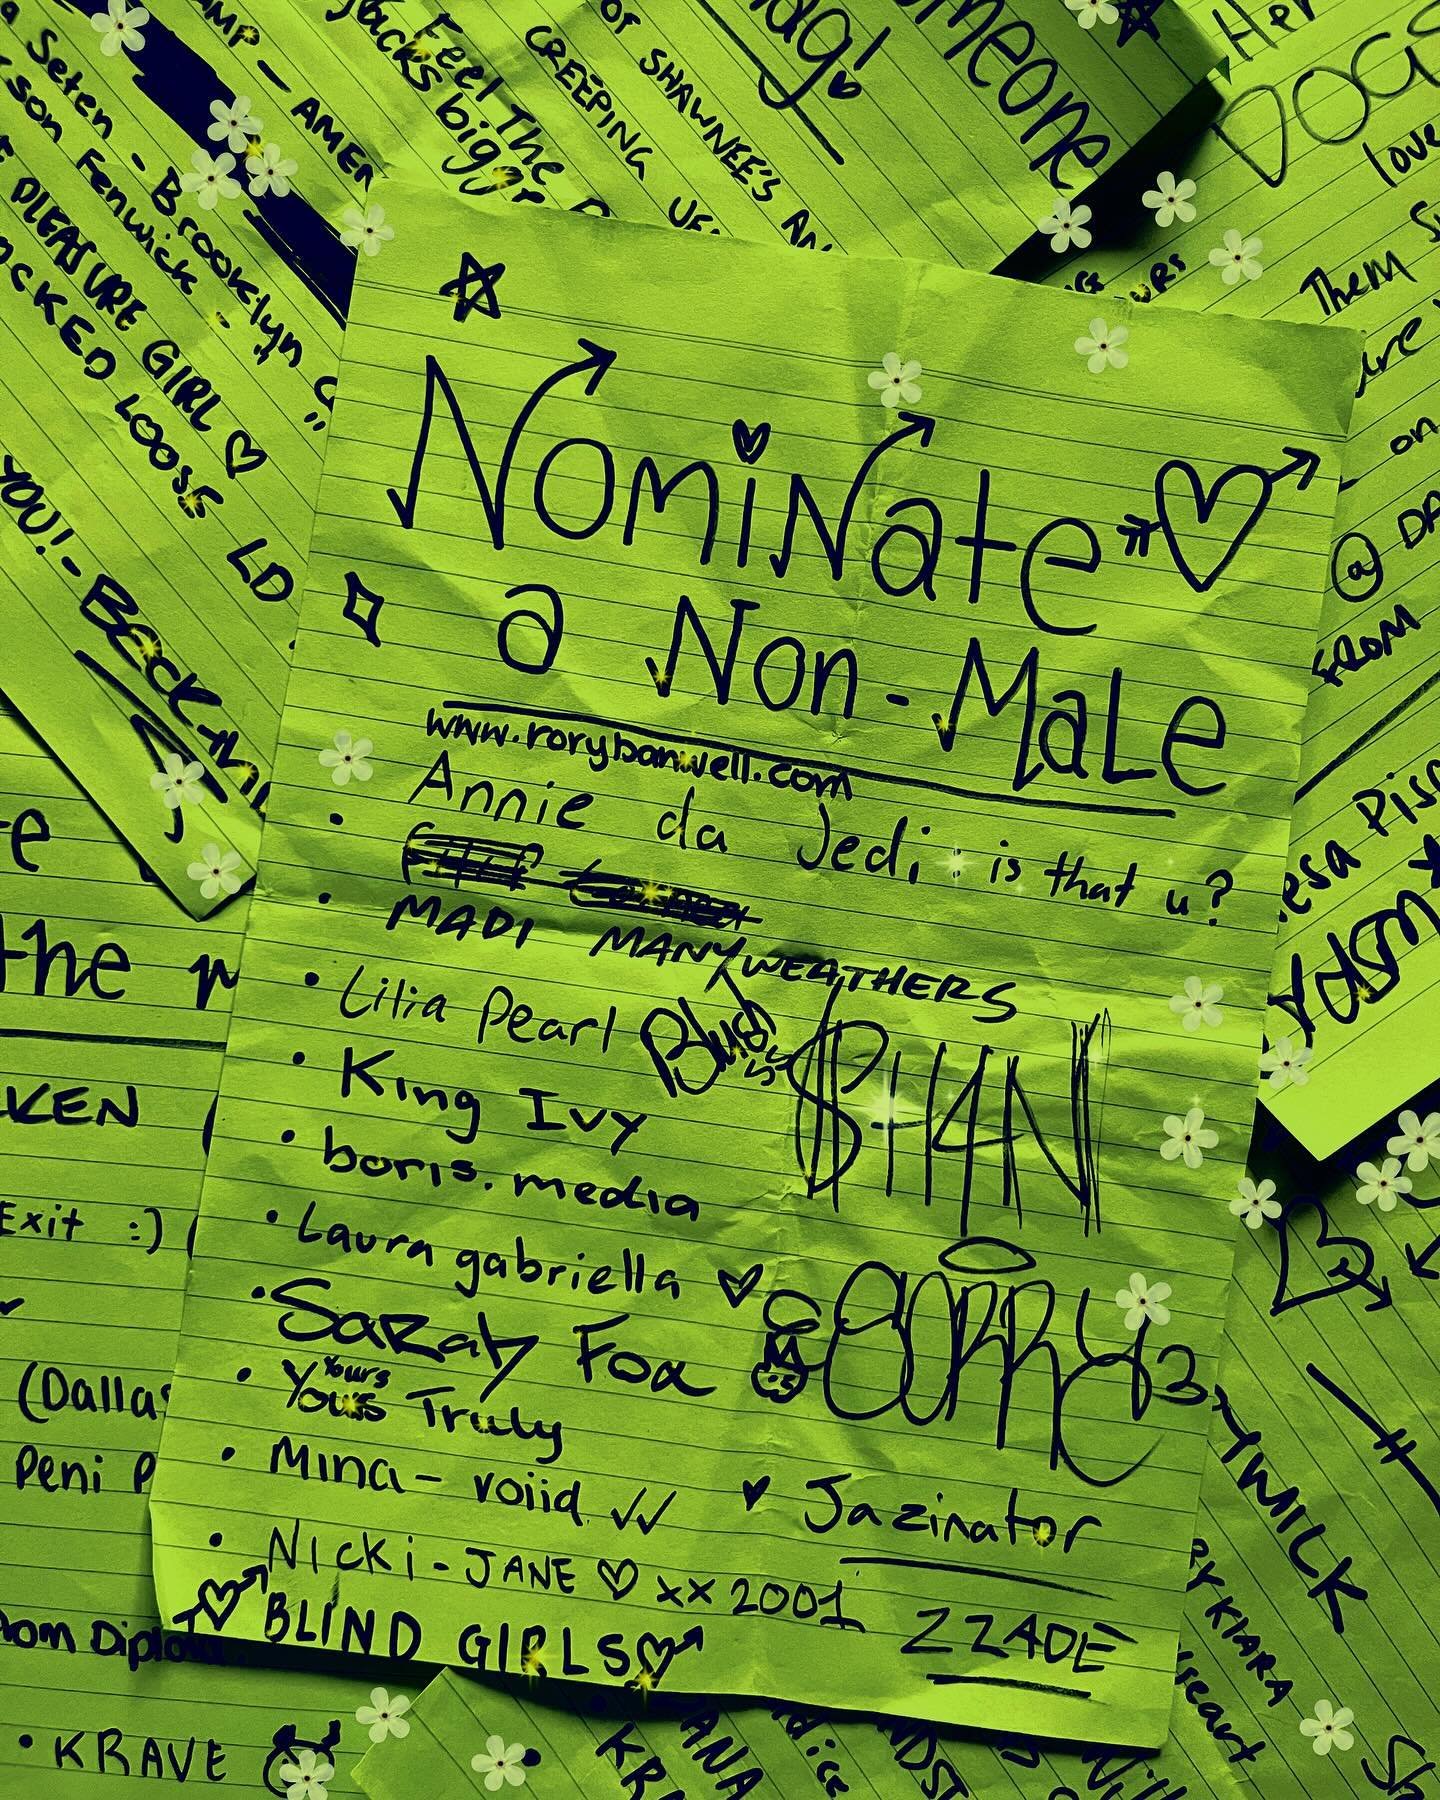 ཐི♡ཋྀ &bull; Nominations &bull; ཐི♡ཋྀ

Absolutely loved watching people get excited about who they were going to add to these lists we had at the table across New Bloom Festival and Cult Fest! 

The best part was watching the moment when someone woul